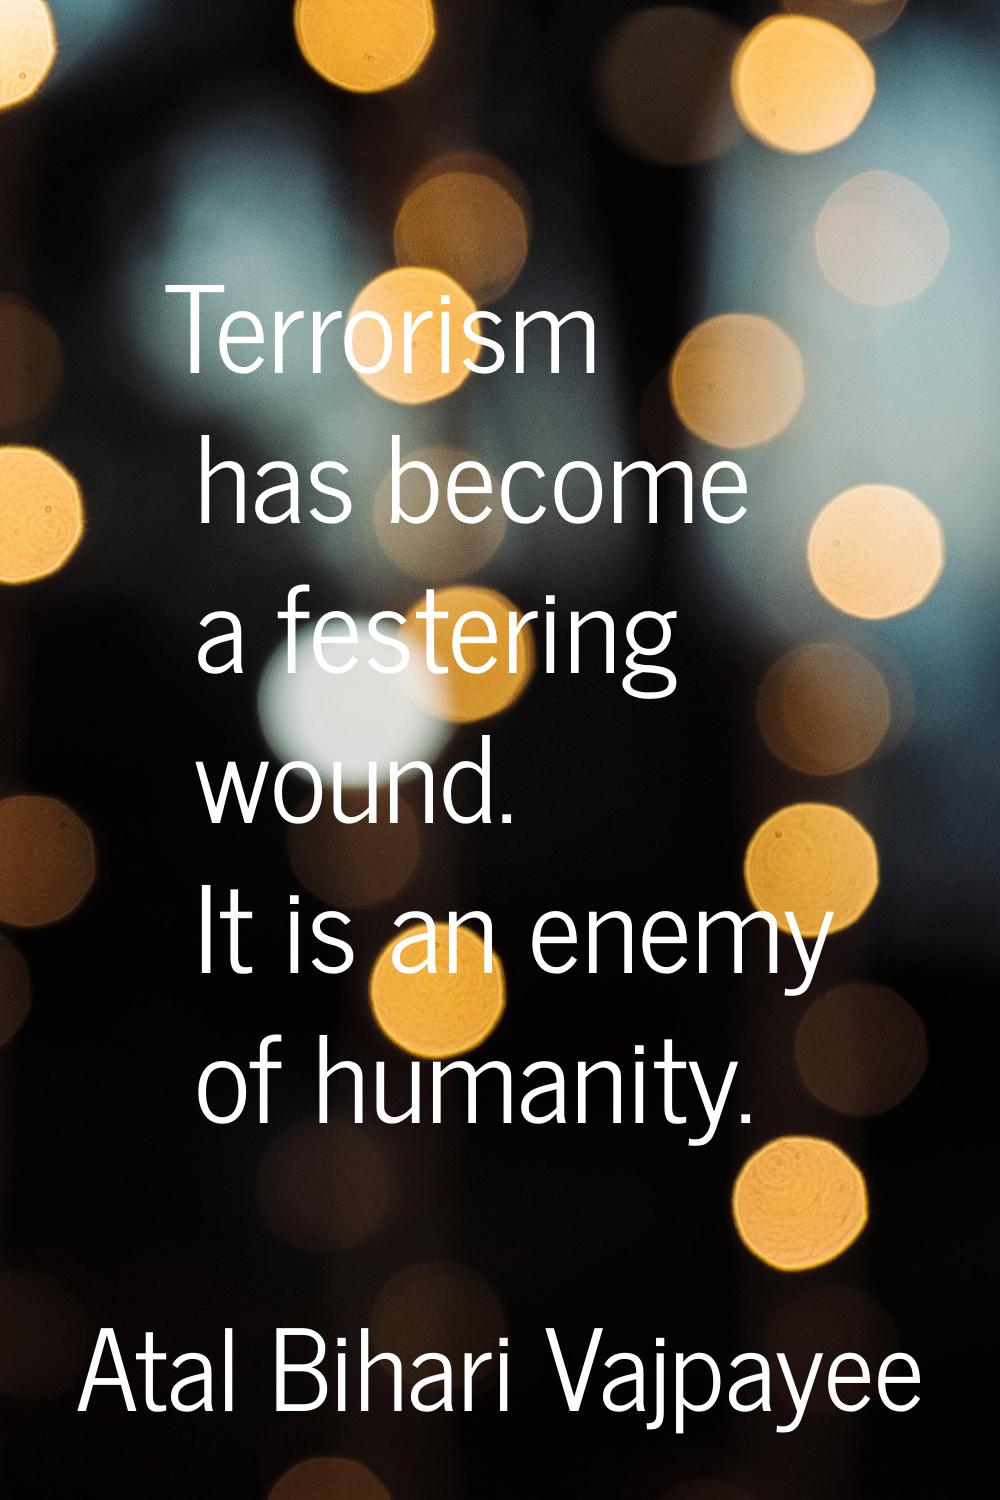 Terrorism has become a festering wound. It is an enemy of humanity.